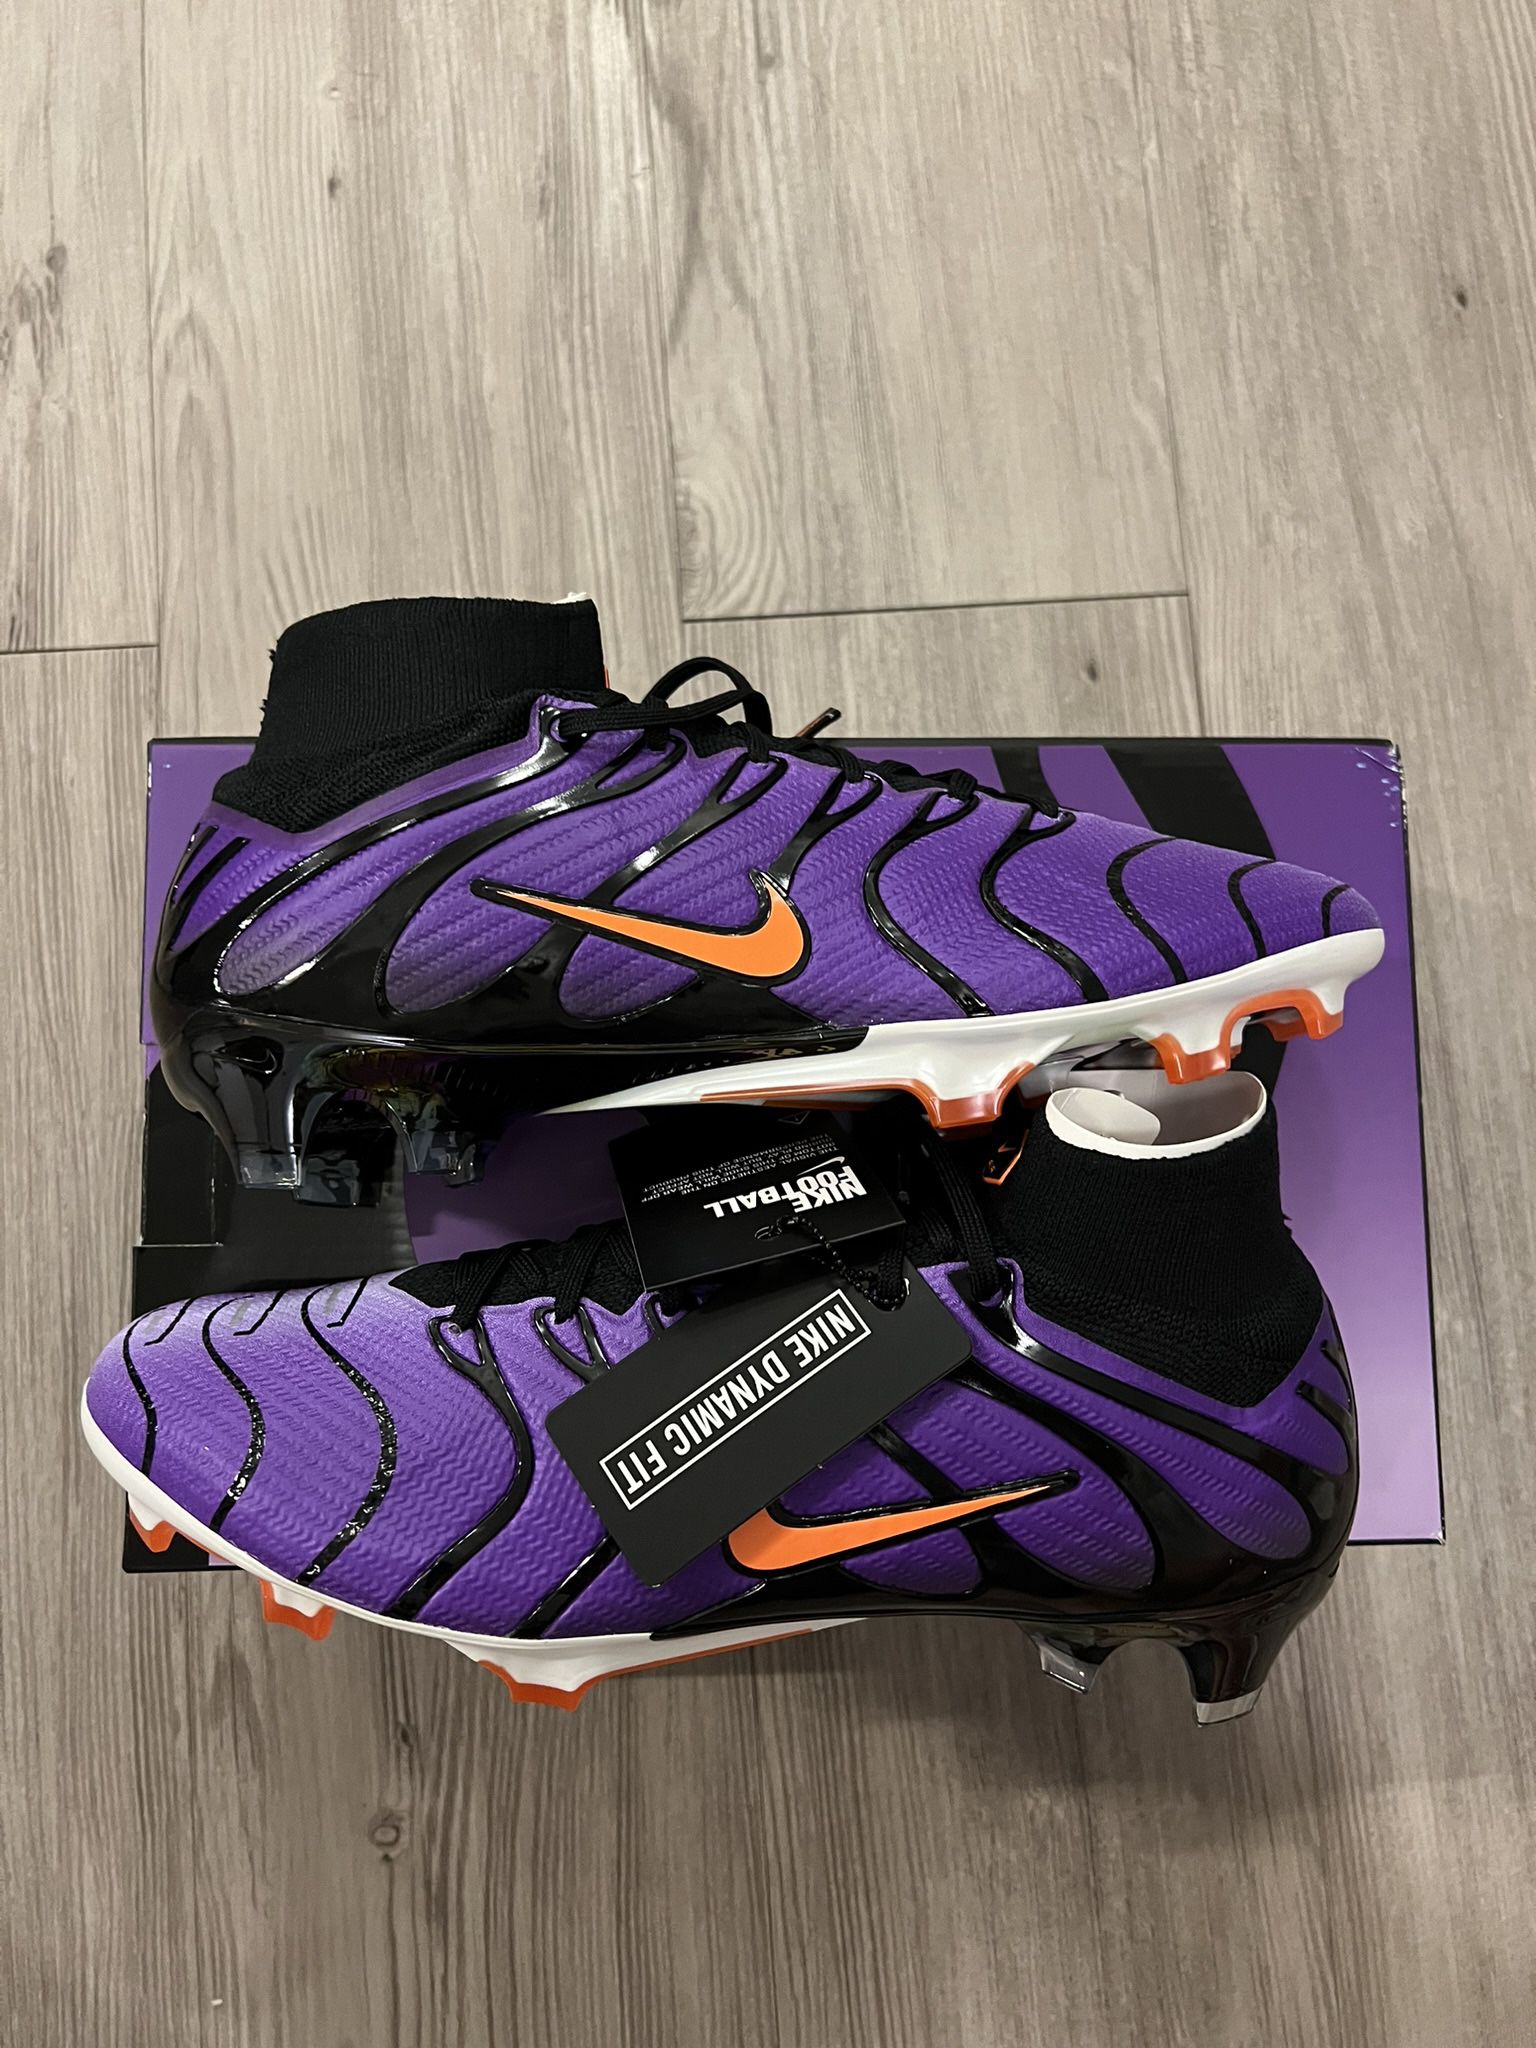 Nike Mercurial Superfly 9 FG High Top Soccer Cleats Voltage Purple Size 10M